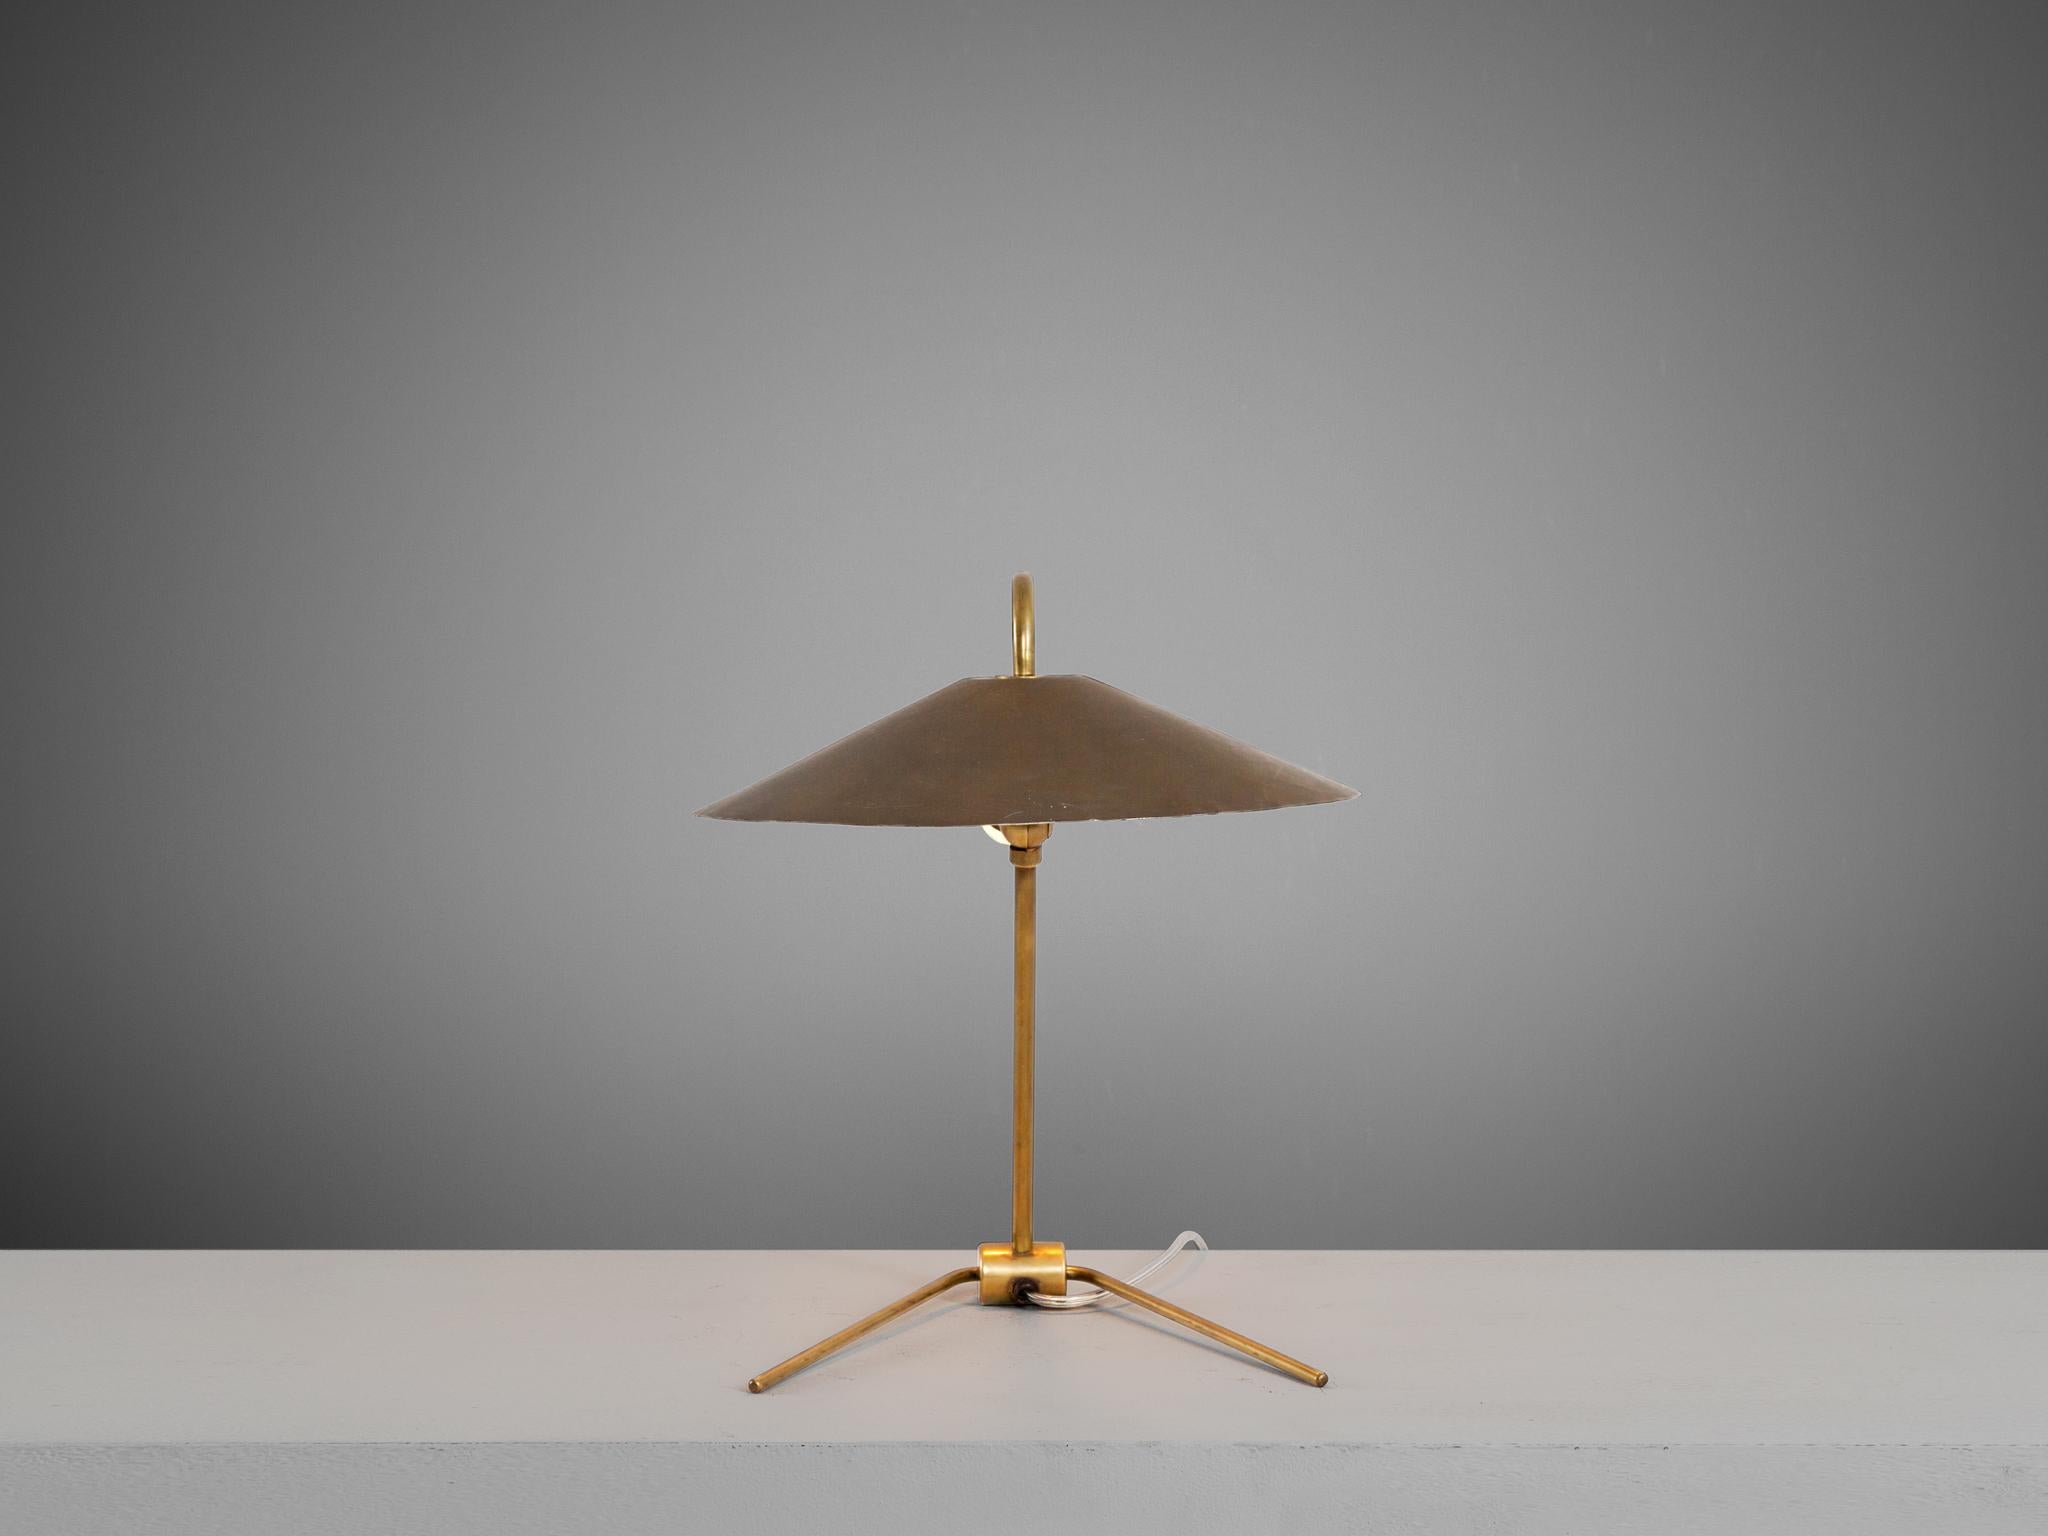 Nikolay Diulgheroff, table light, brass, Italy, 1930s. 

Very elegant table lamp in brass. This simplistic design is excellent. A thin brass stern is the frame of the large brass shade which is adjustable to every position admired. The golden tones